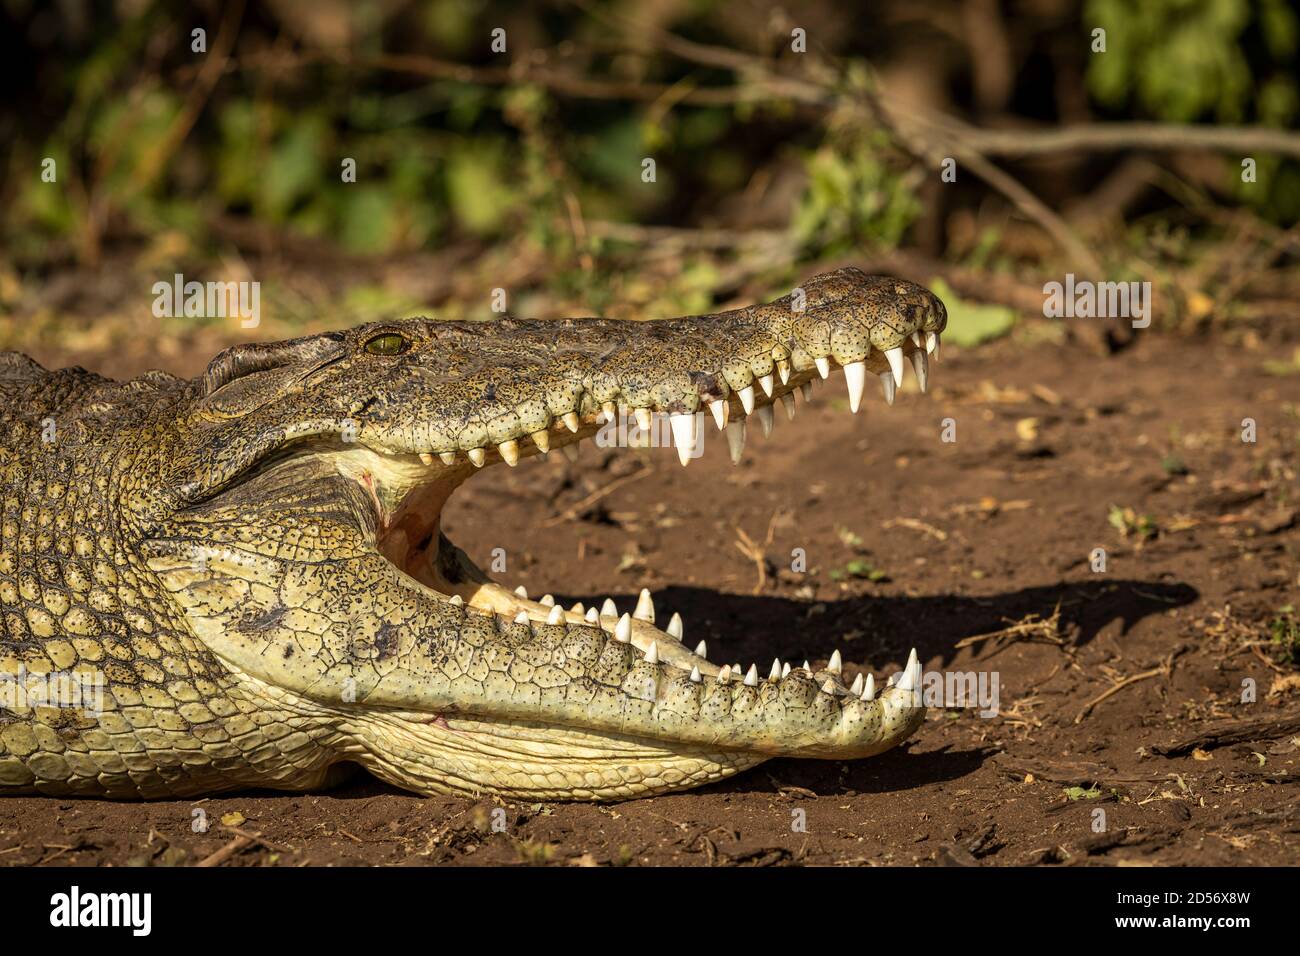 Nile crocodile with its mouth open showing big teeth lying on brown soil at the edge of water in Chobe River in Botswana Stock Photo